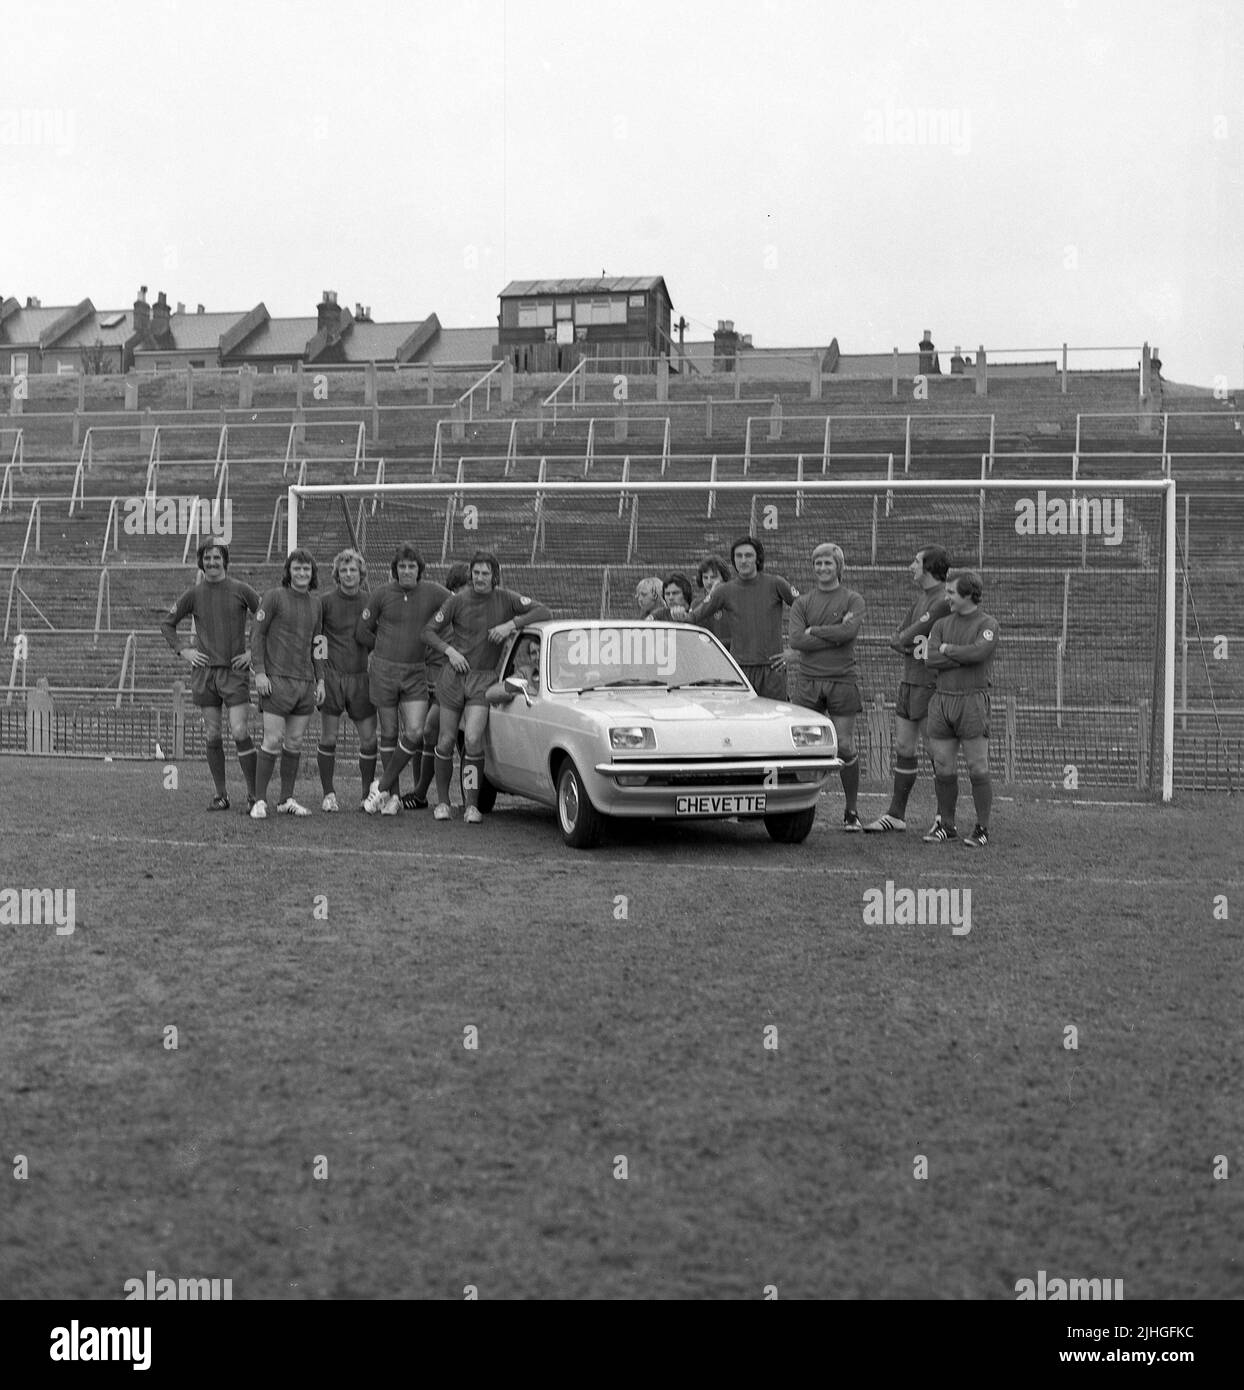 1974, historical, football manager, Malcolm Allison sitting in 2-door Chevette hatchback car on the pitch at Selhurst Park, with team players standing around. Selhurst Park is the home of Crystal Palace Football Club. A wooden hut on top of steep banked terraces says Police Post. Stock Photo